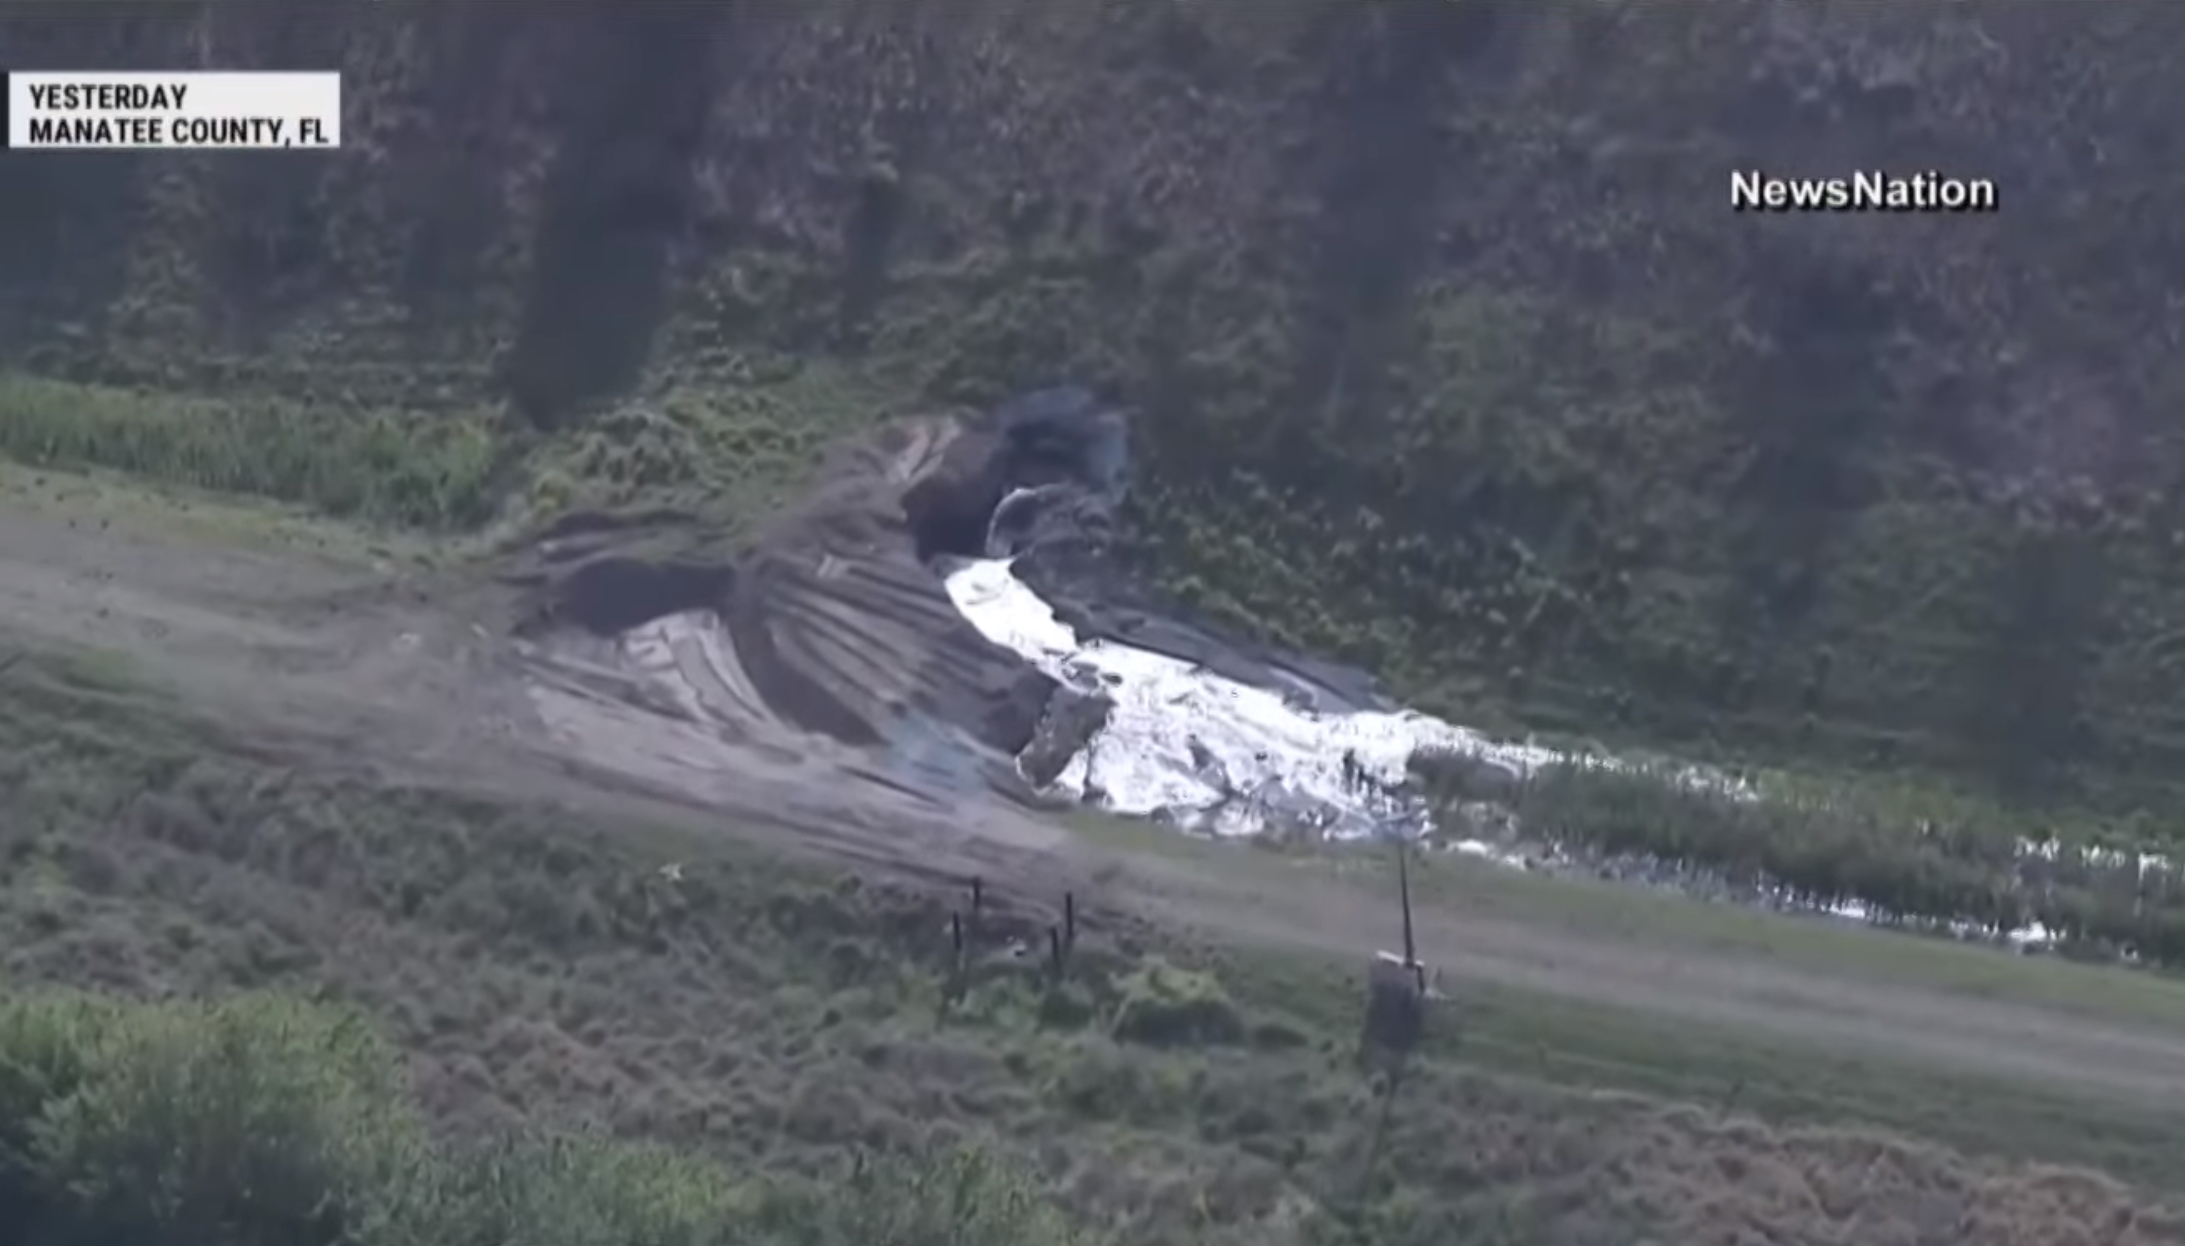 Aerial view of a leak from the Piney Point reservoir in Manatee County, Florida, on 3 April 2021. Photo: NewsNation / MSNBC